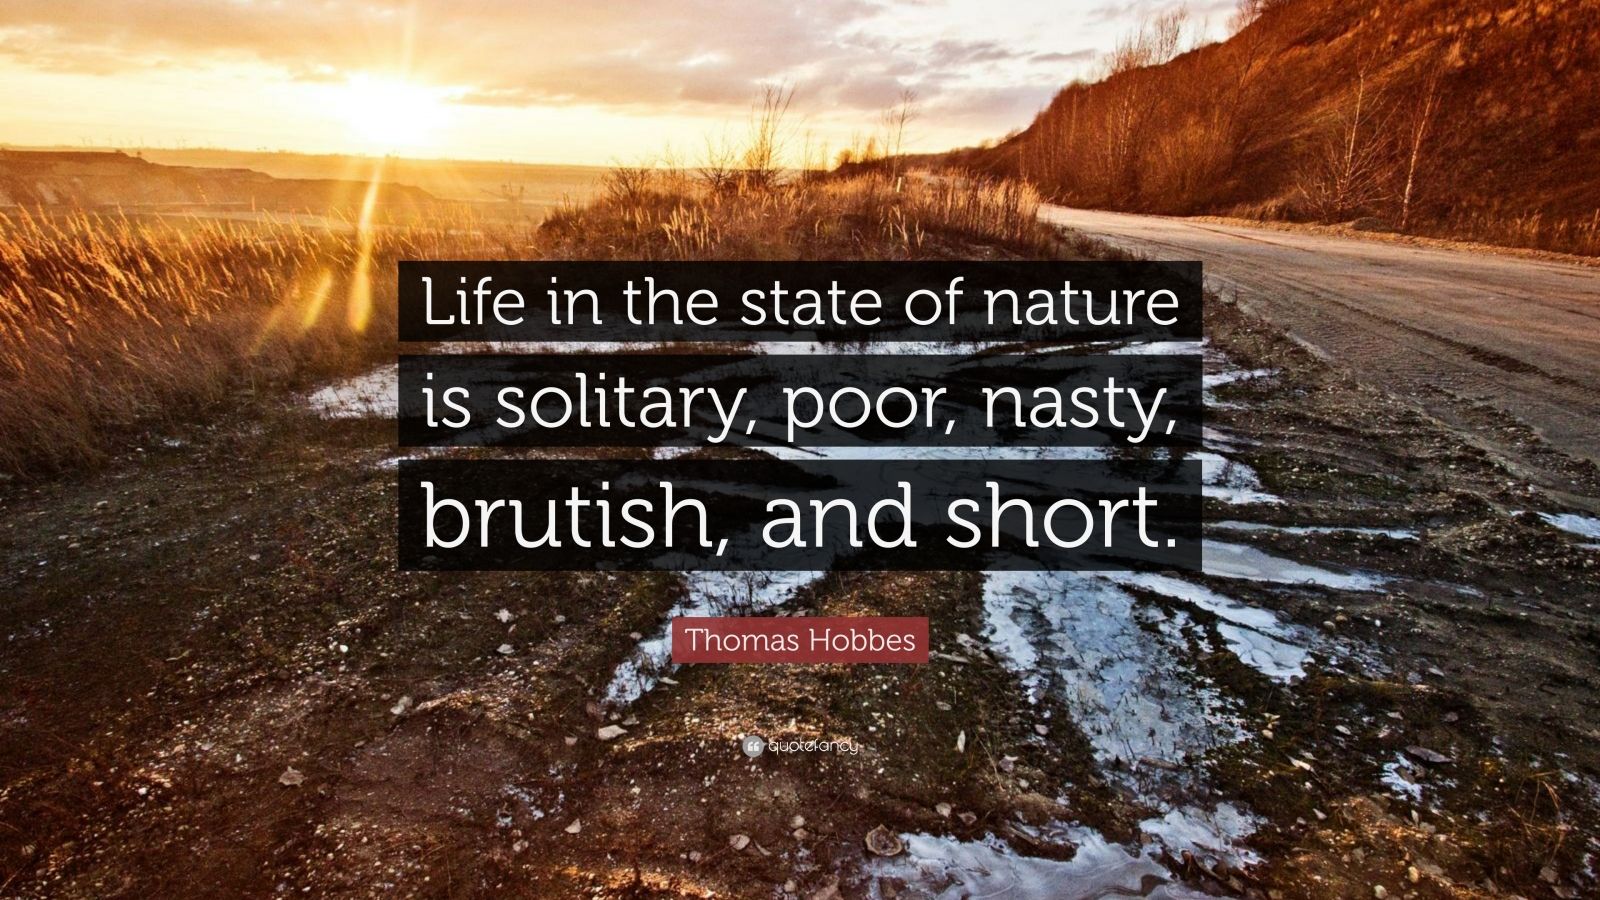 5279011-Thomas-Hobbes-Quote-Life-in-the-state-of-nature-is-solitary-poor.jpg